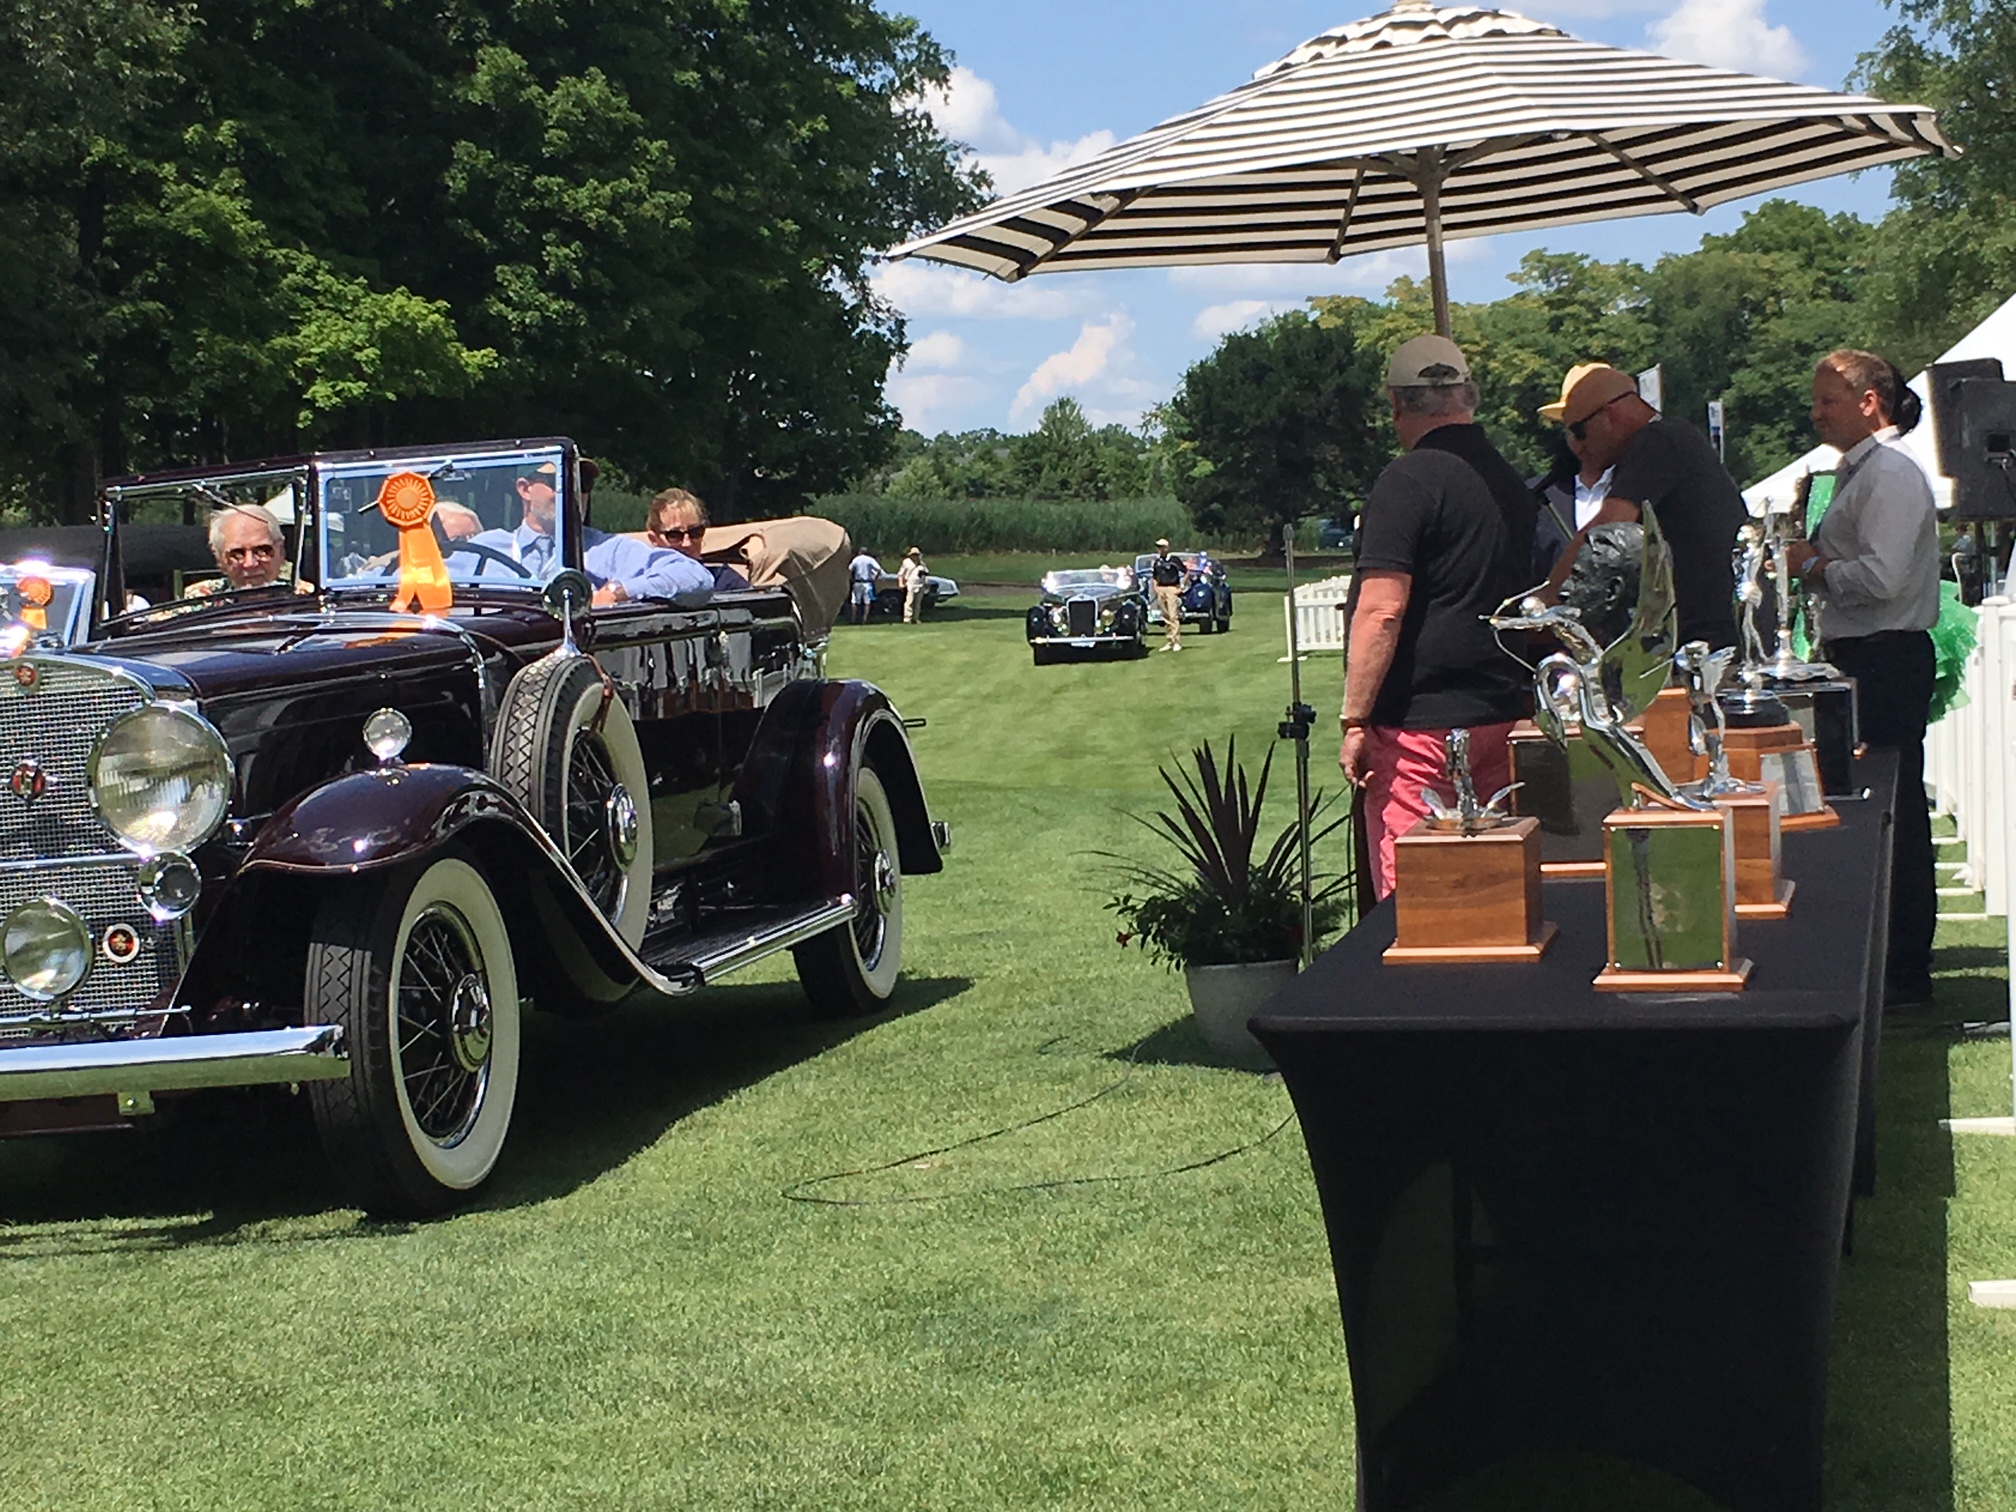  Mark Hyman, owner of Hyman Ltd. Classic Cars and SSR member, presents the “Spirit of the Hobby” award 